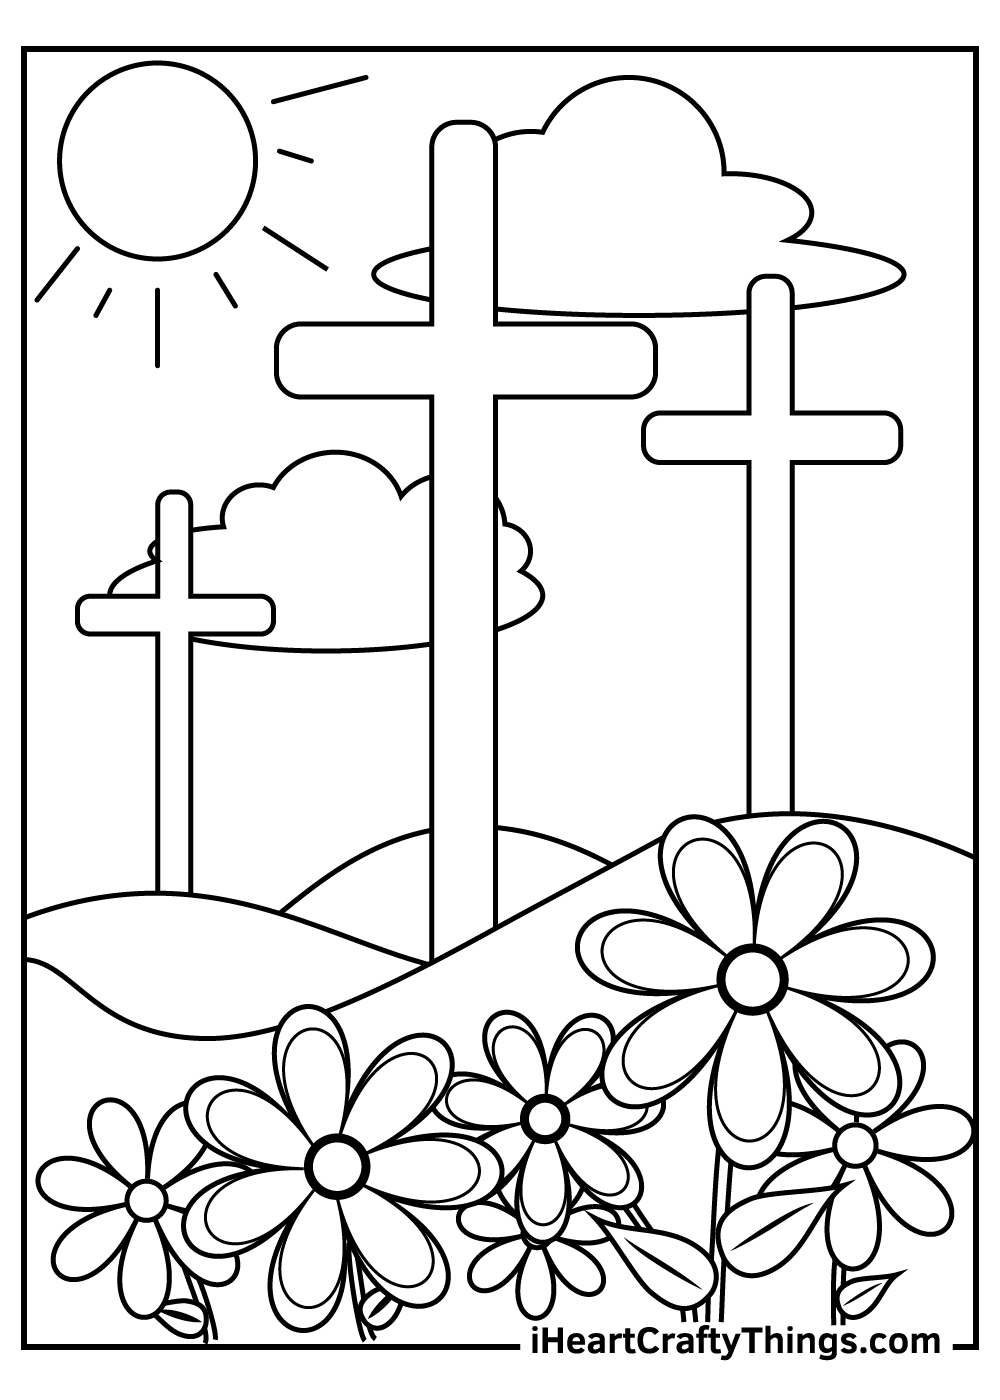 Printable Religious Easter Coloring Pages Updated 20